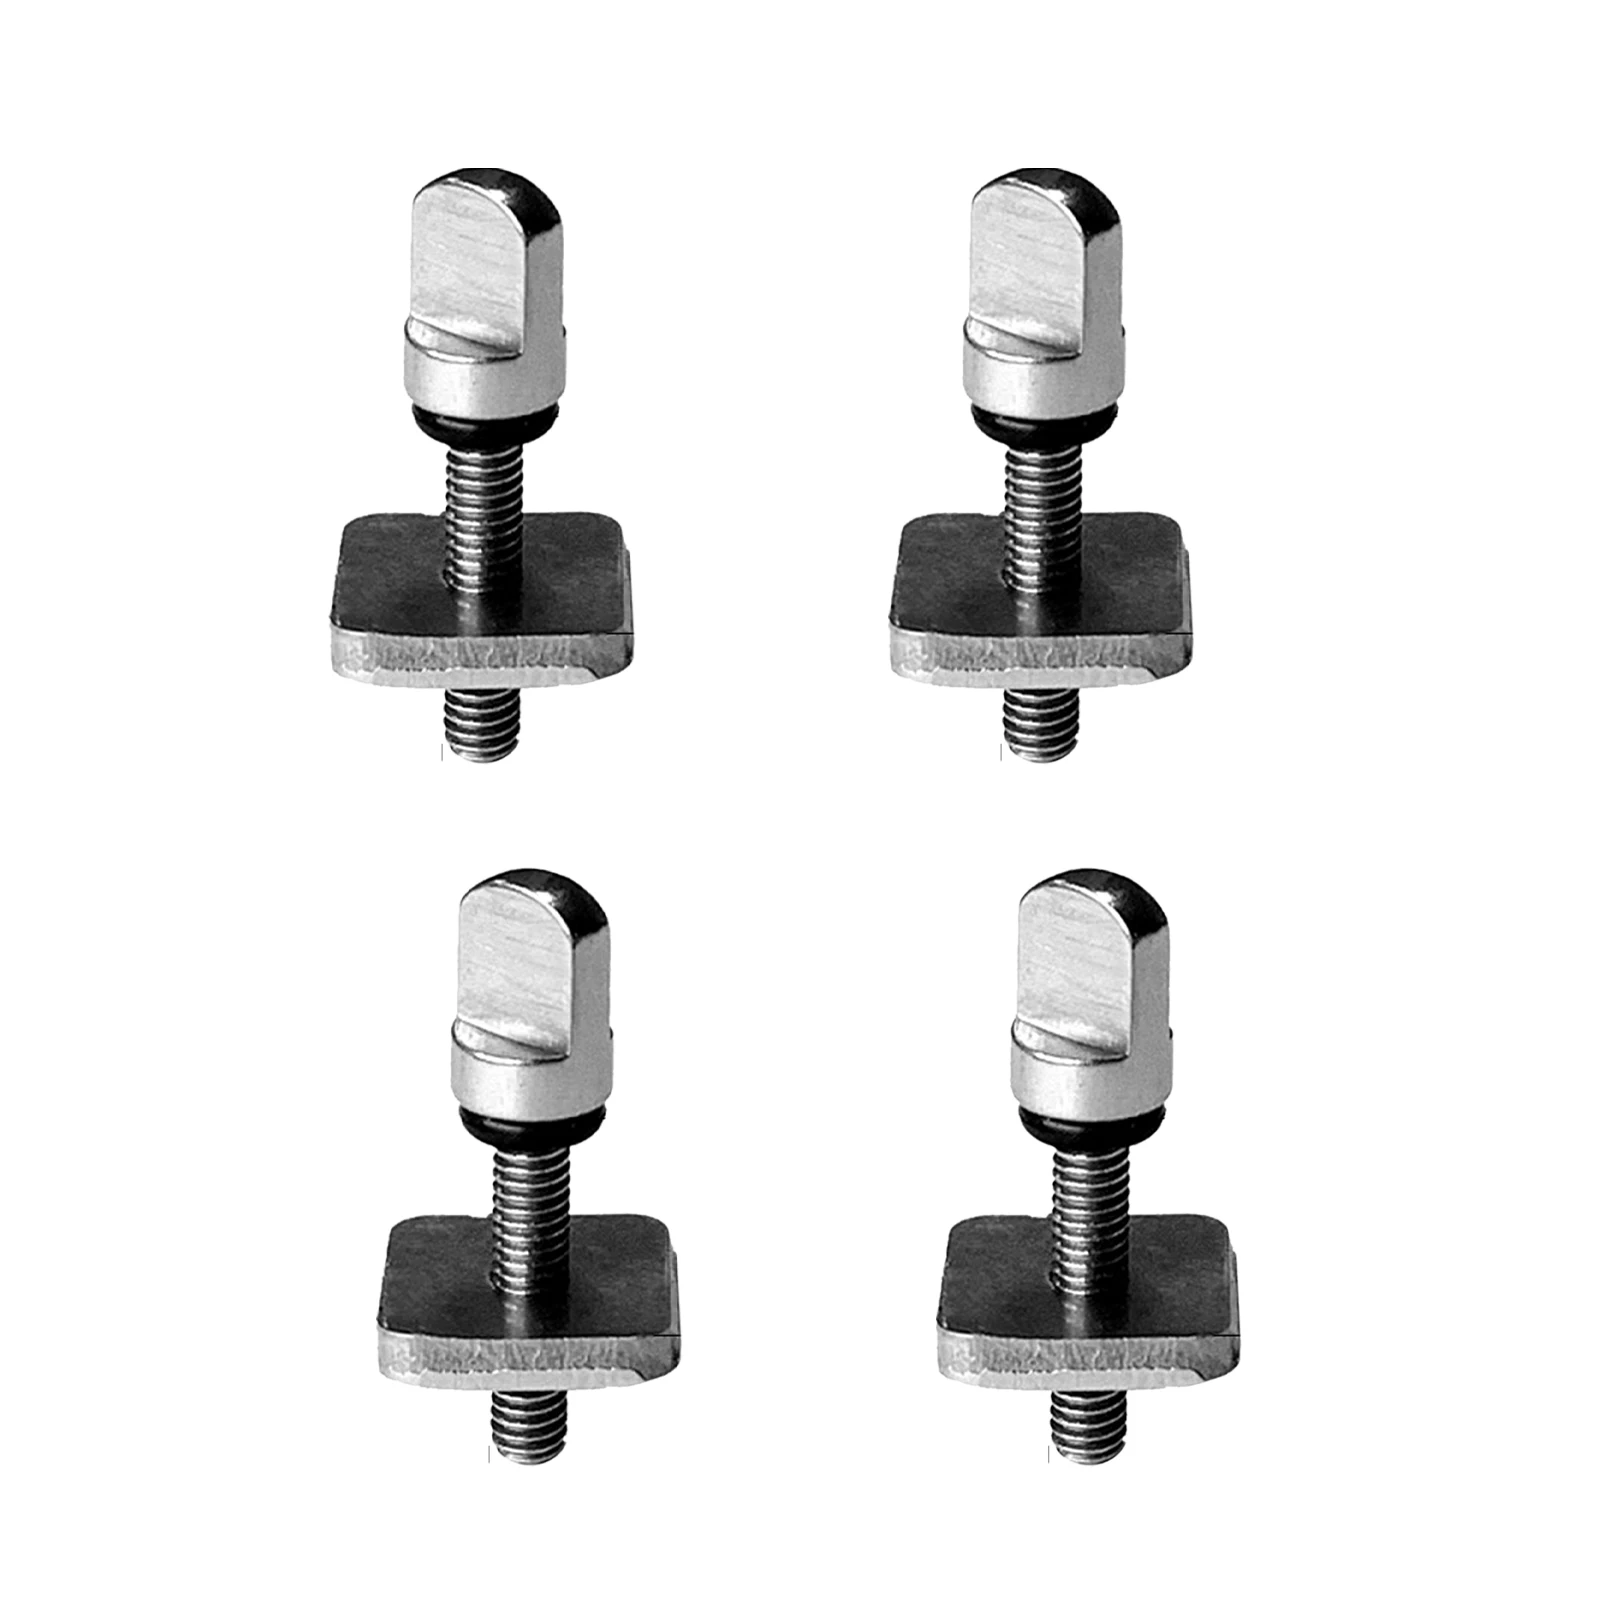 

4pcs/pack Surfboards Fin Screw Inflatable SUP Paddle Board Easy Install Universal Tail Stainless Steel With Plate Surfing Flat